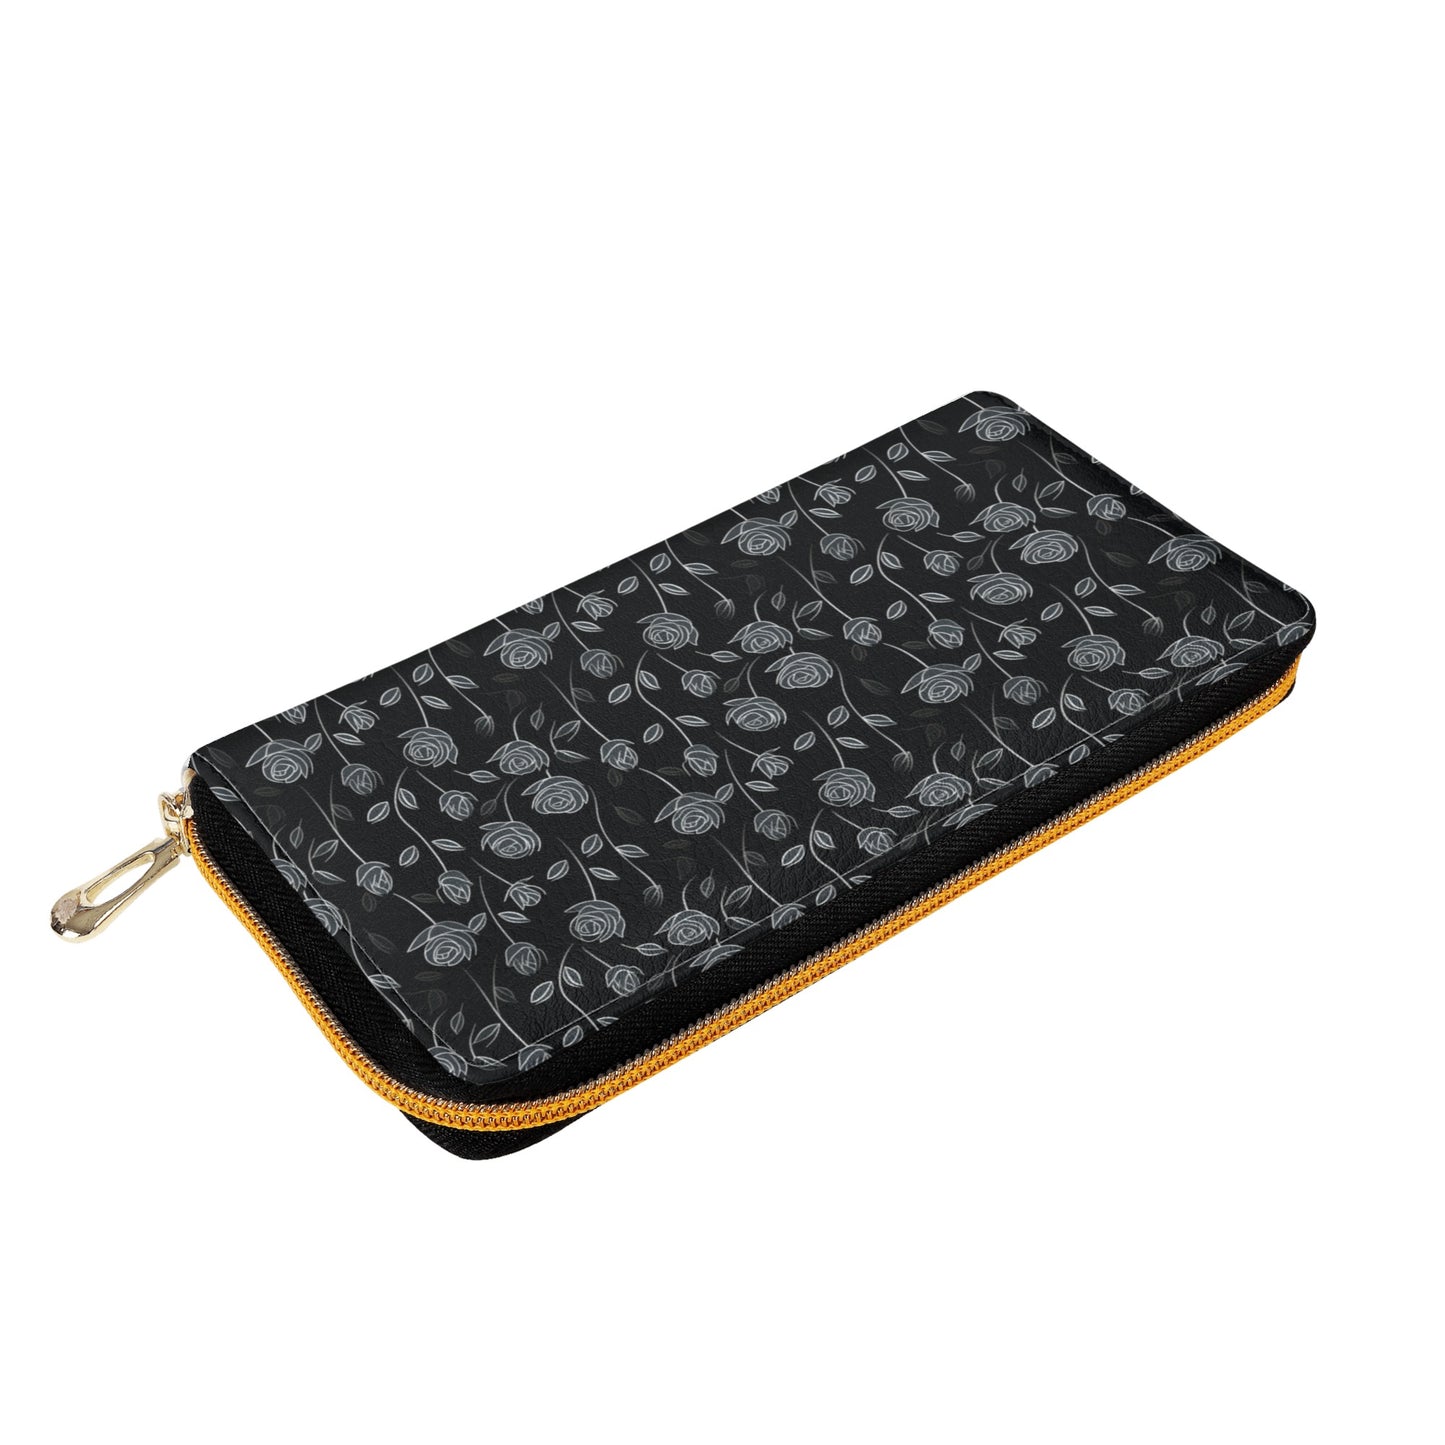 Contrasting Elegance: White Outlined Roses on a Black Background Leather Wallet (PU)